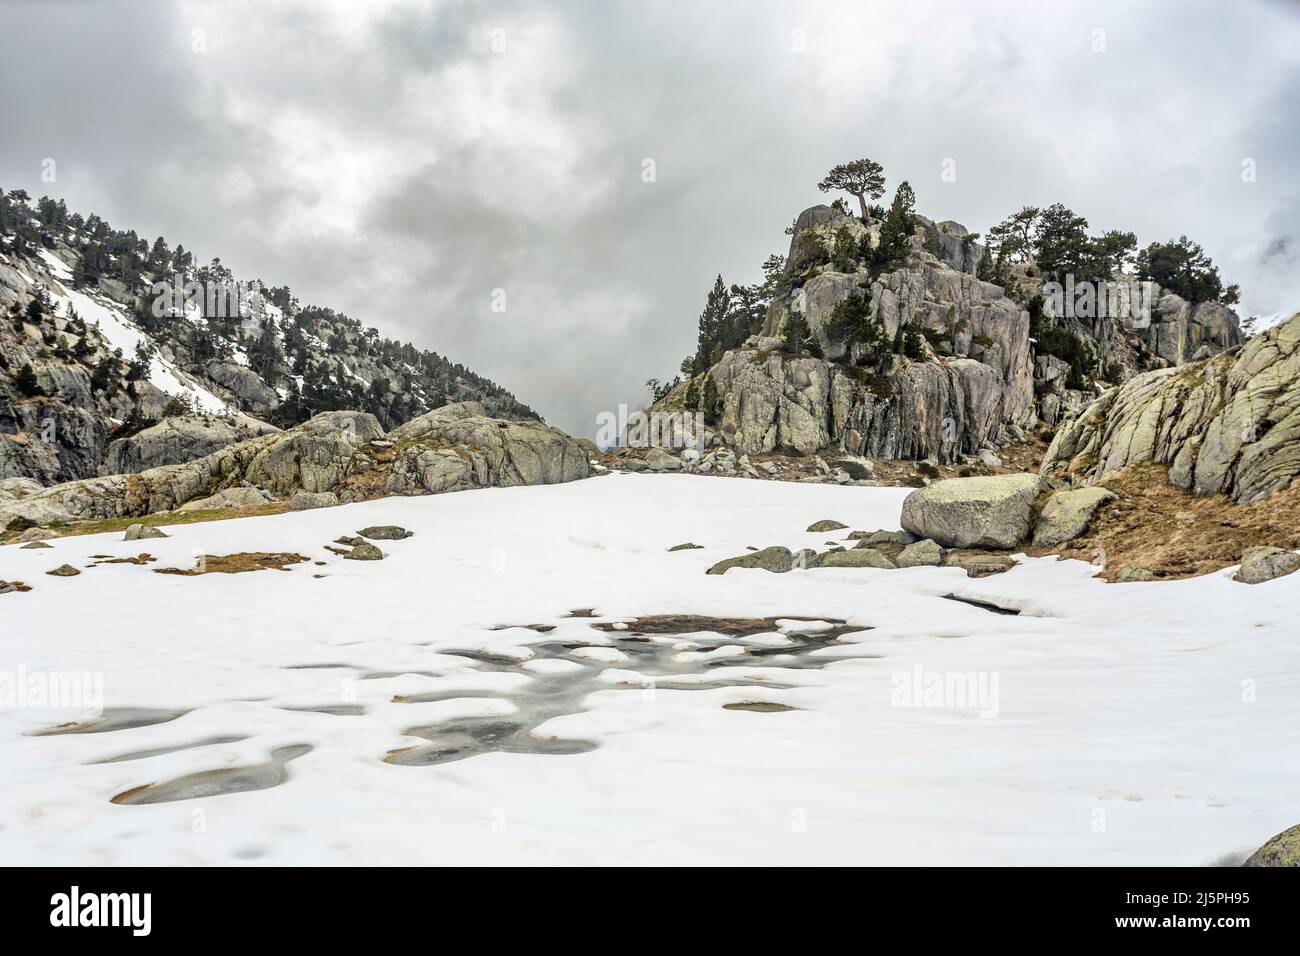 Bohi valley in winter, Aiguestortes national park, Pyrenees, Spain Stock Photo